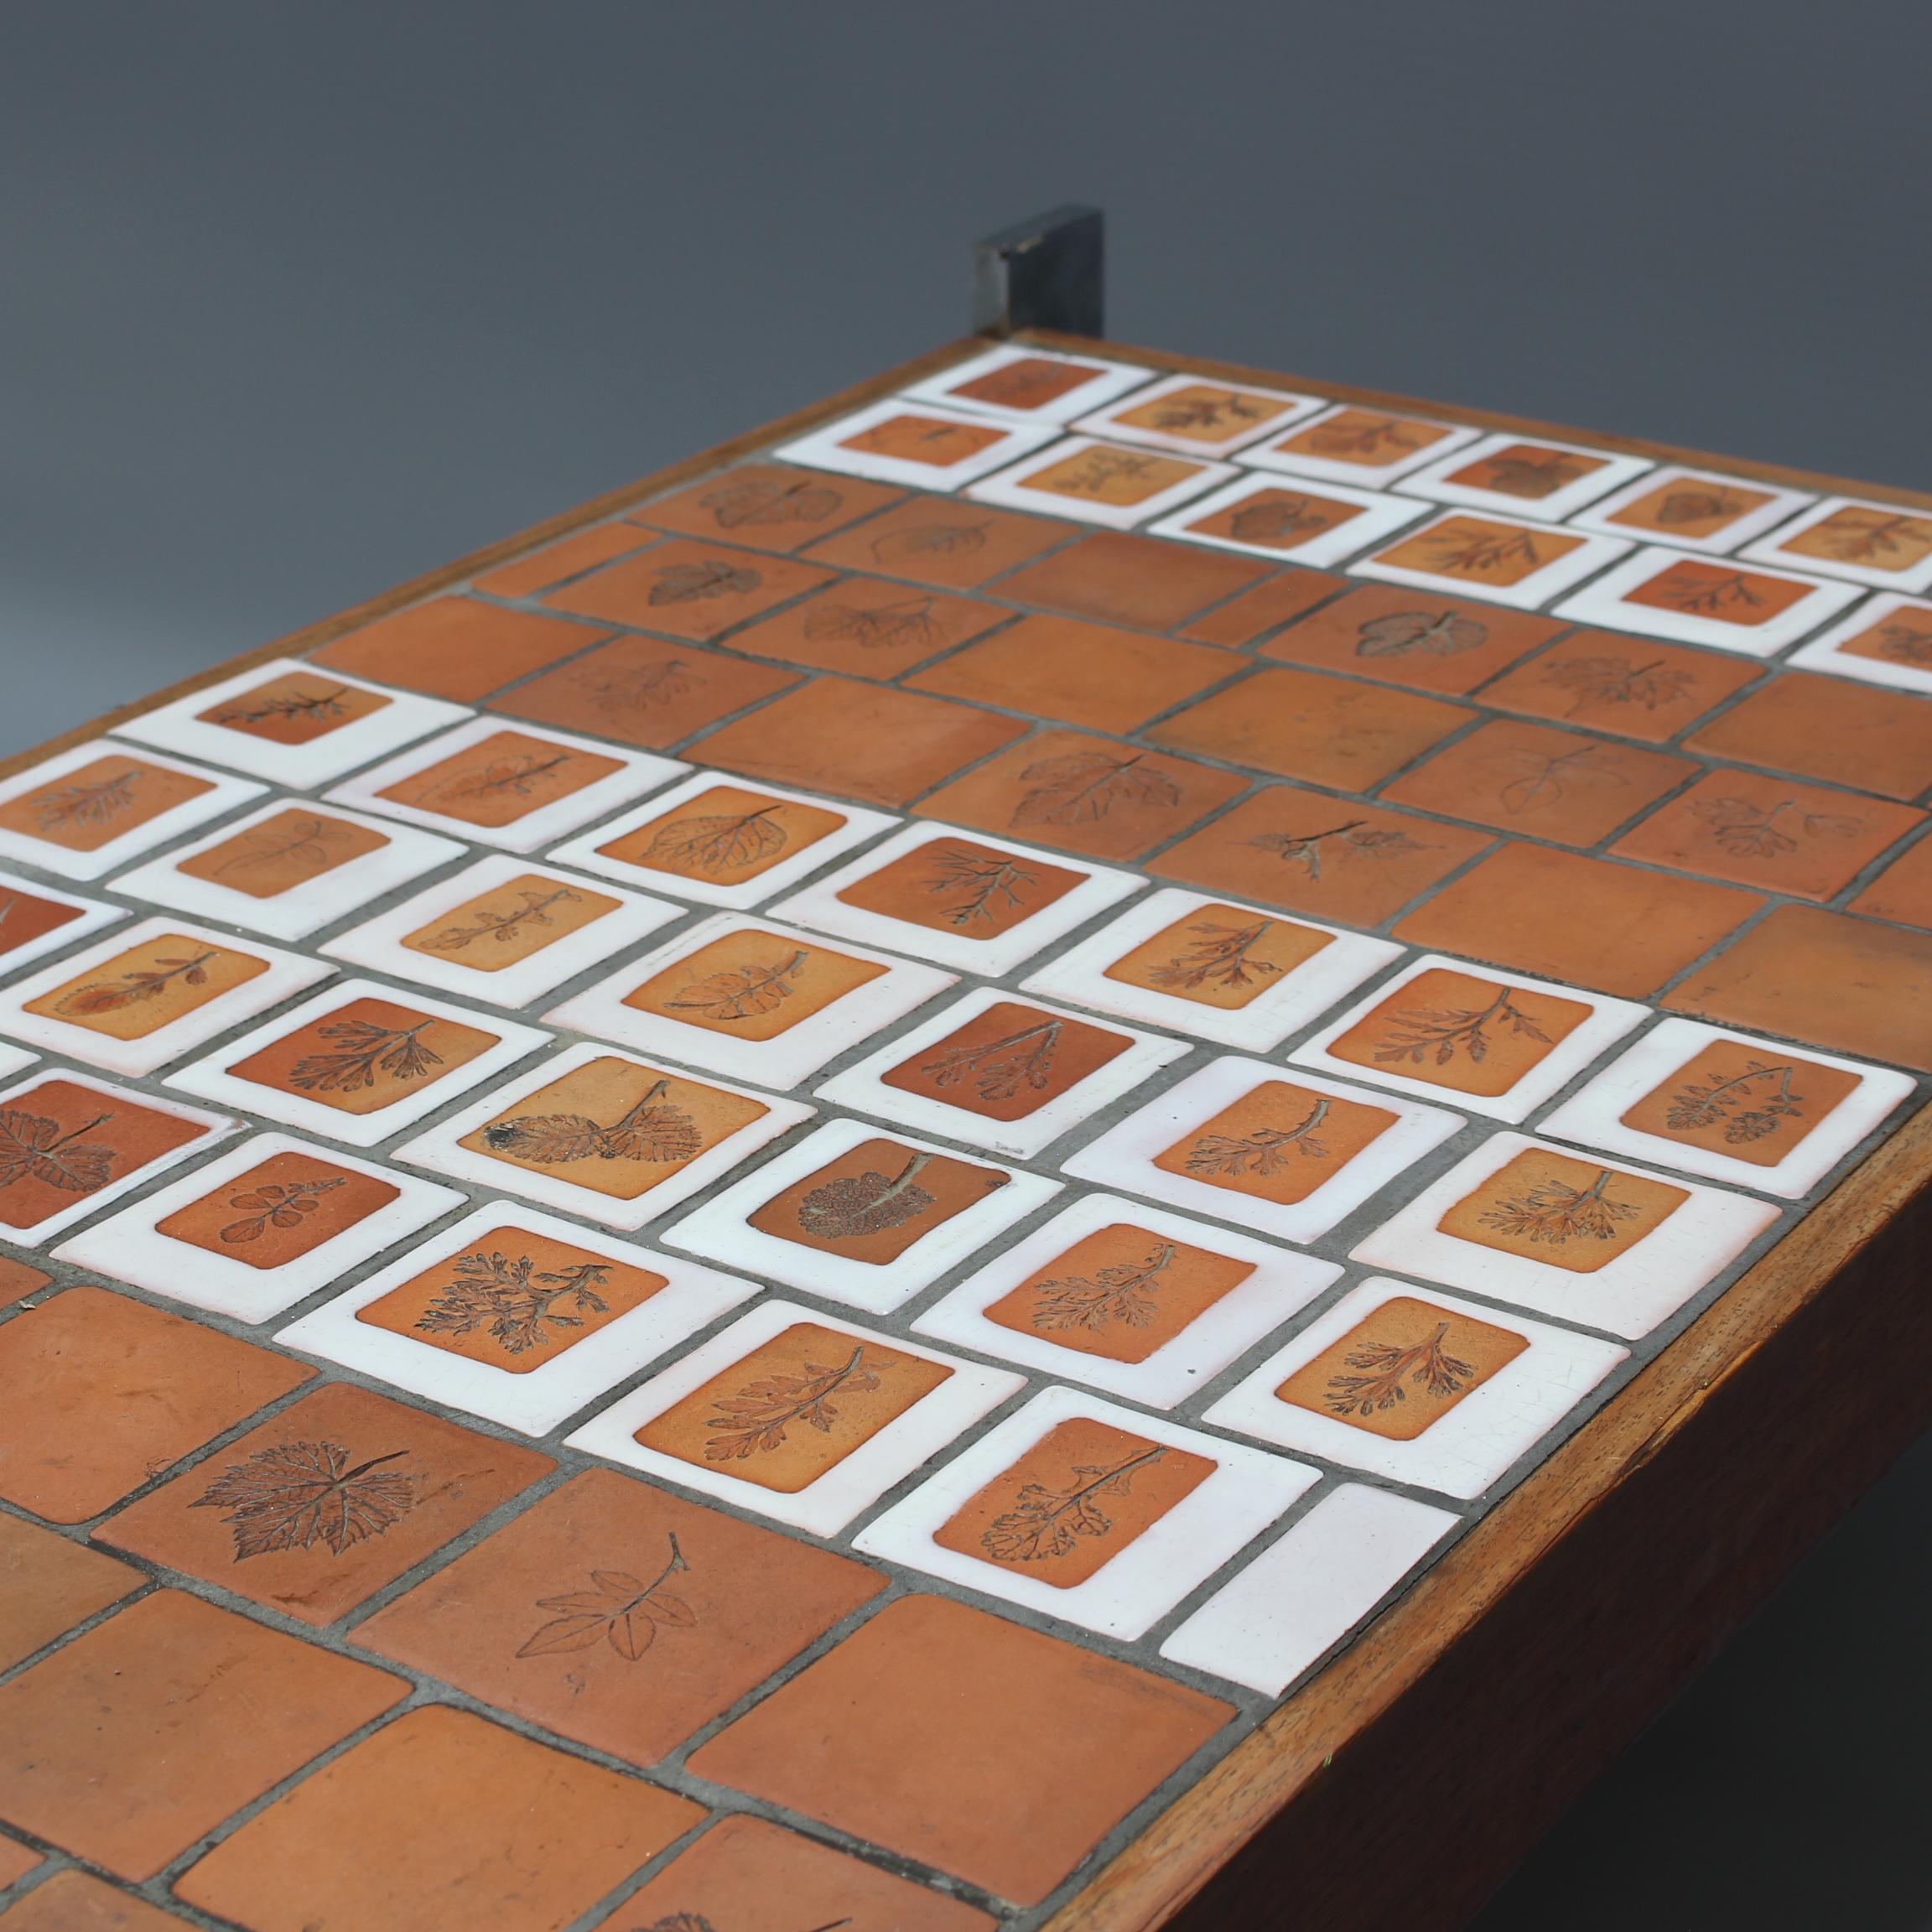 Vintage French Coffee Table with Leaf Motif Tiles by Roger Capron (circa 1970s) For Sale 13